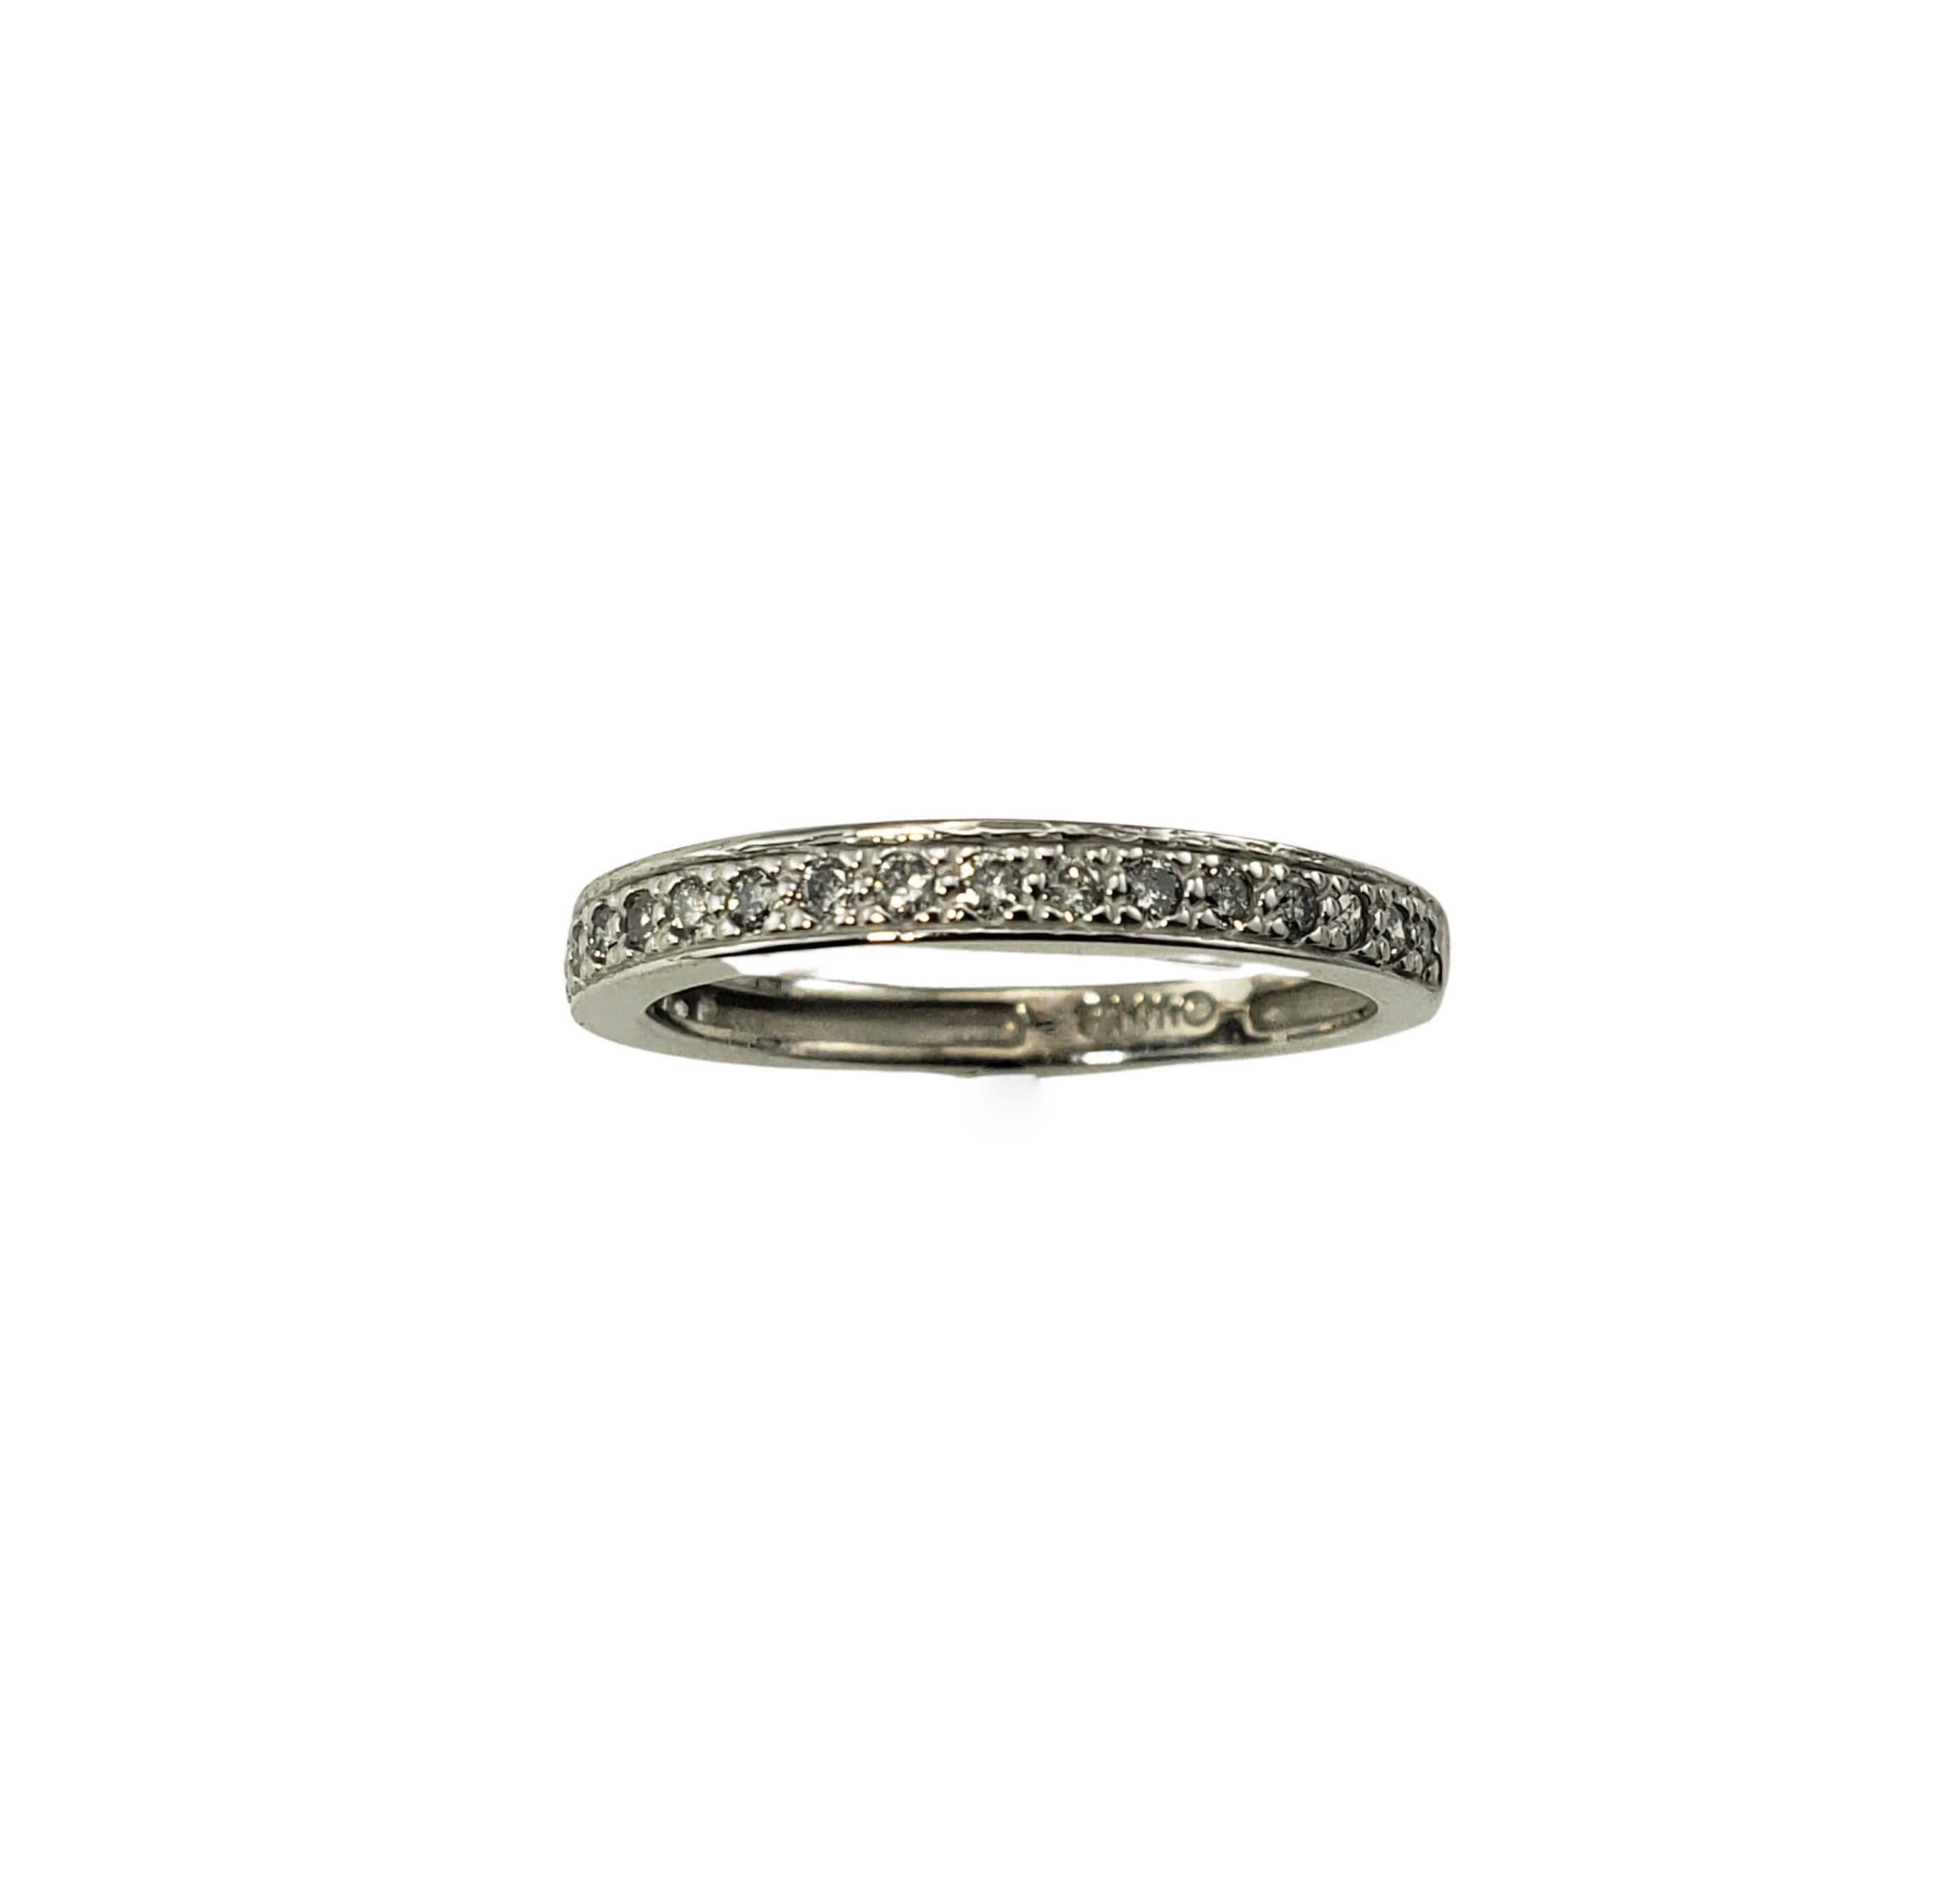 Vintage 14 Karat White Gold and Diamond Wedding Band Ring Size 5.5-

This sparkling band features 20 round brilliant cut diamonds set in classic 14K white gold.  Width:  2.5 mm.

Approximate total diamond weight:  .30 ct.

Diamond color: I

Diamond